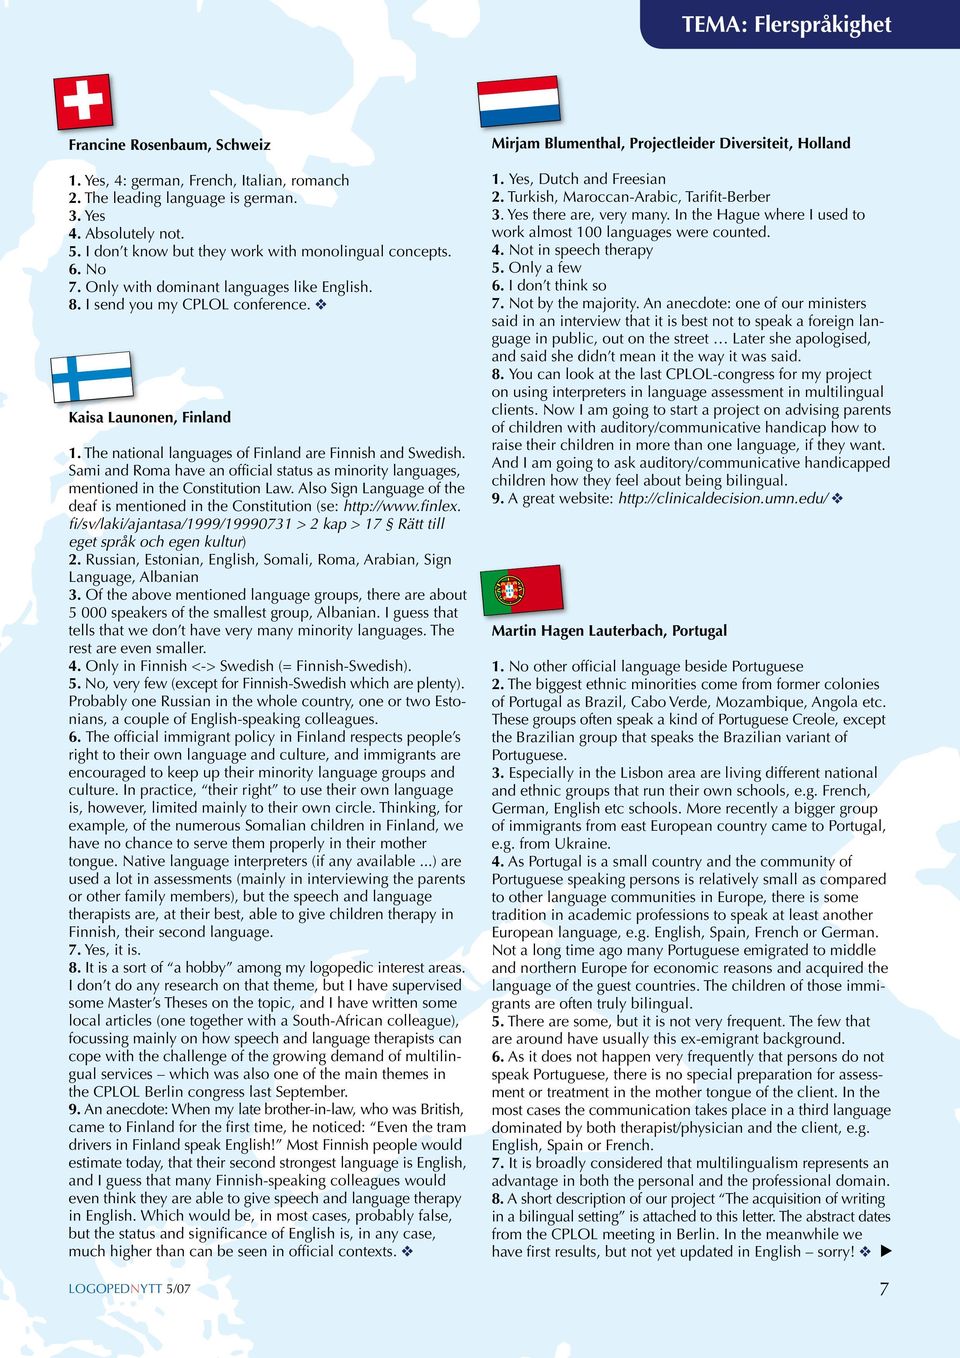 The national languages of Finland are Finnish and Swedish. Sami and Roma have an official status as minority languages, mentioned in the Constitution Law.